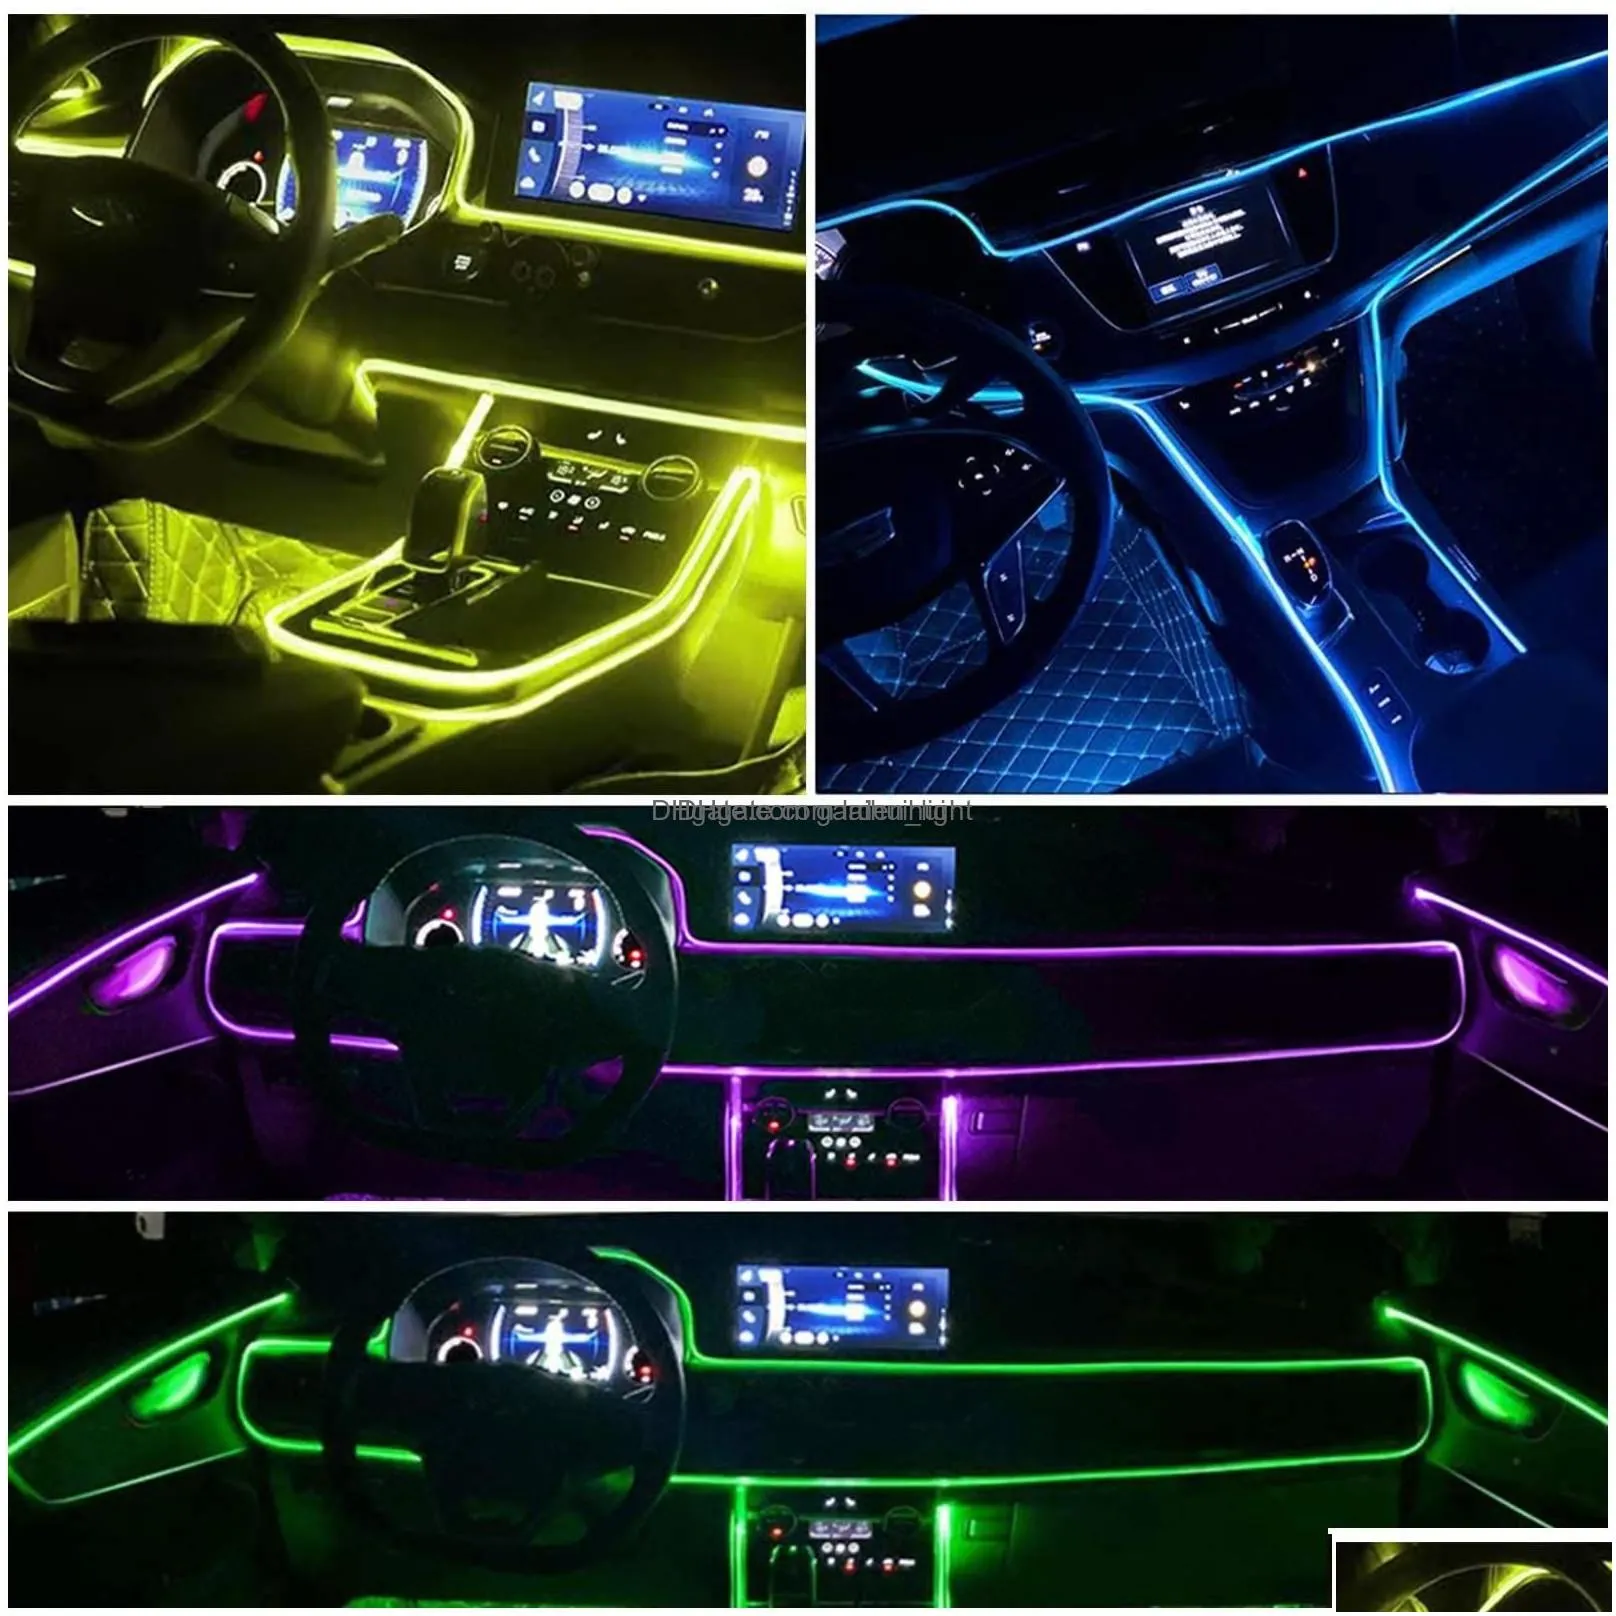 Decorative Lights Led Strips Car Interior Neon Rgb Strip 4/5/6 In 1 Bluetooth App Control Ambient Atmosphere Dashboard Lamp Drop Del Dhby0